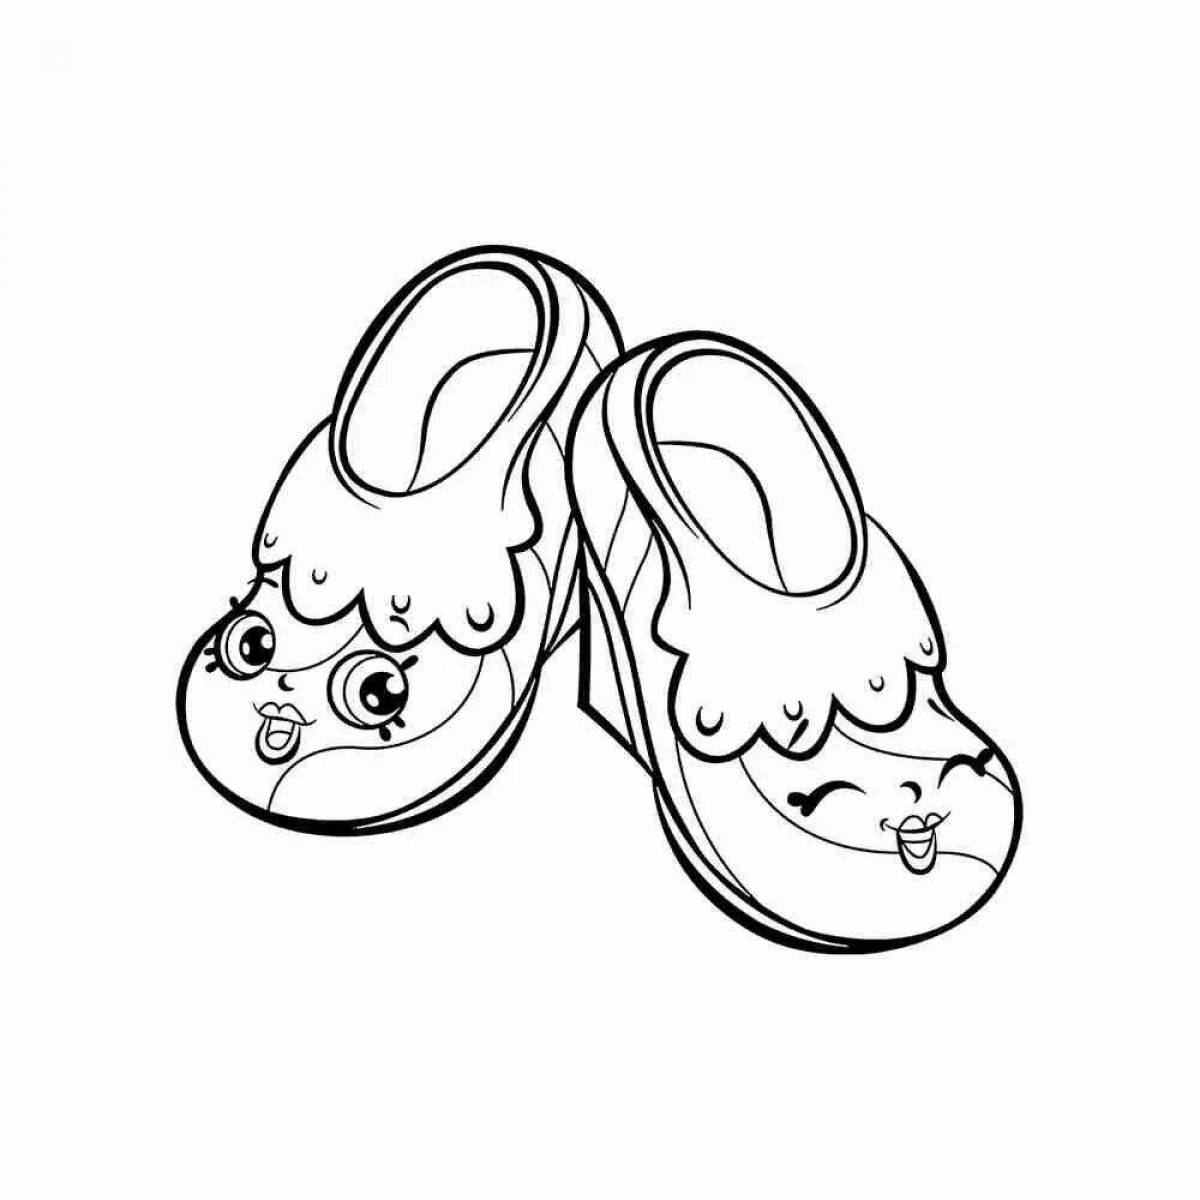 Exciting shoe coloring page